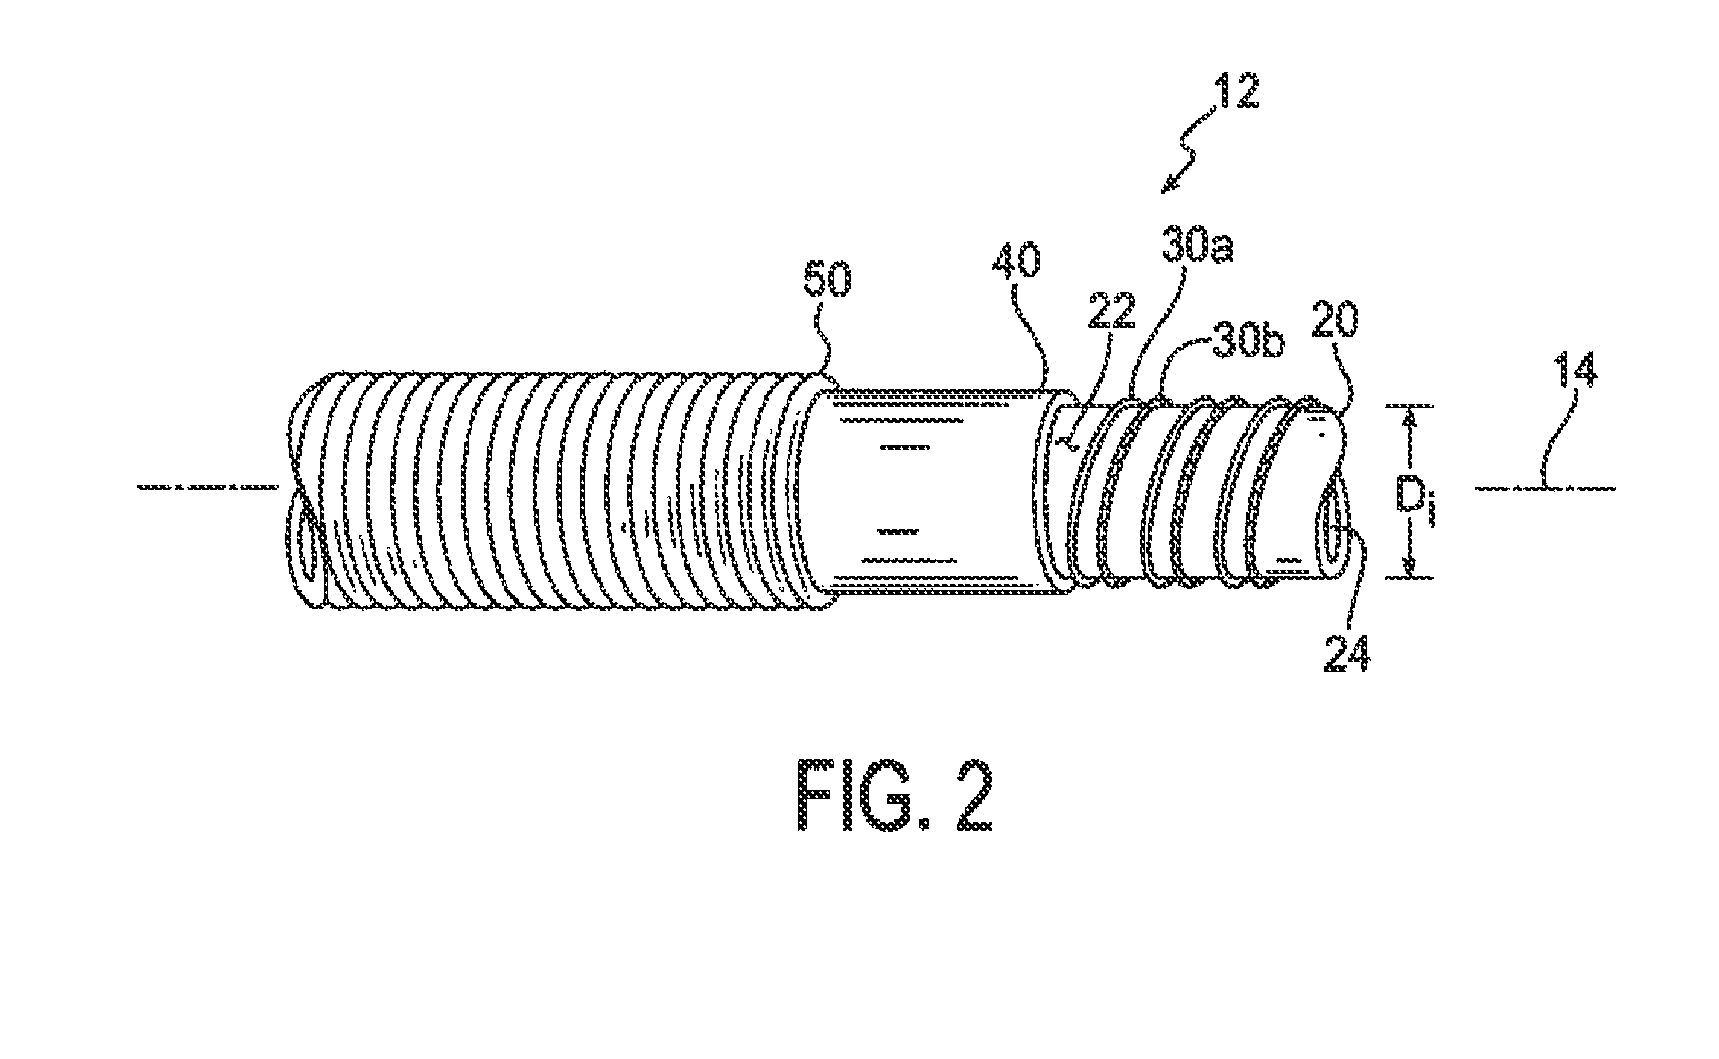 Electrically-heated hose assembly for selective catalytic reduction (SCR) systems